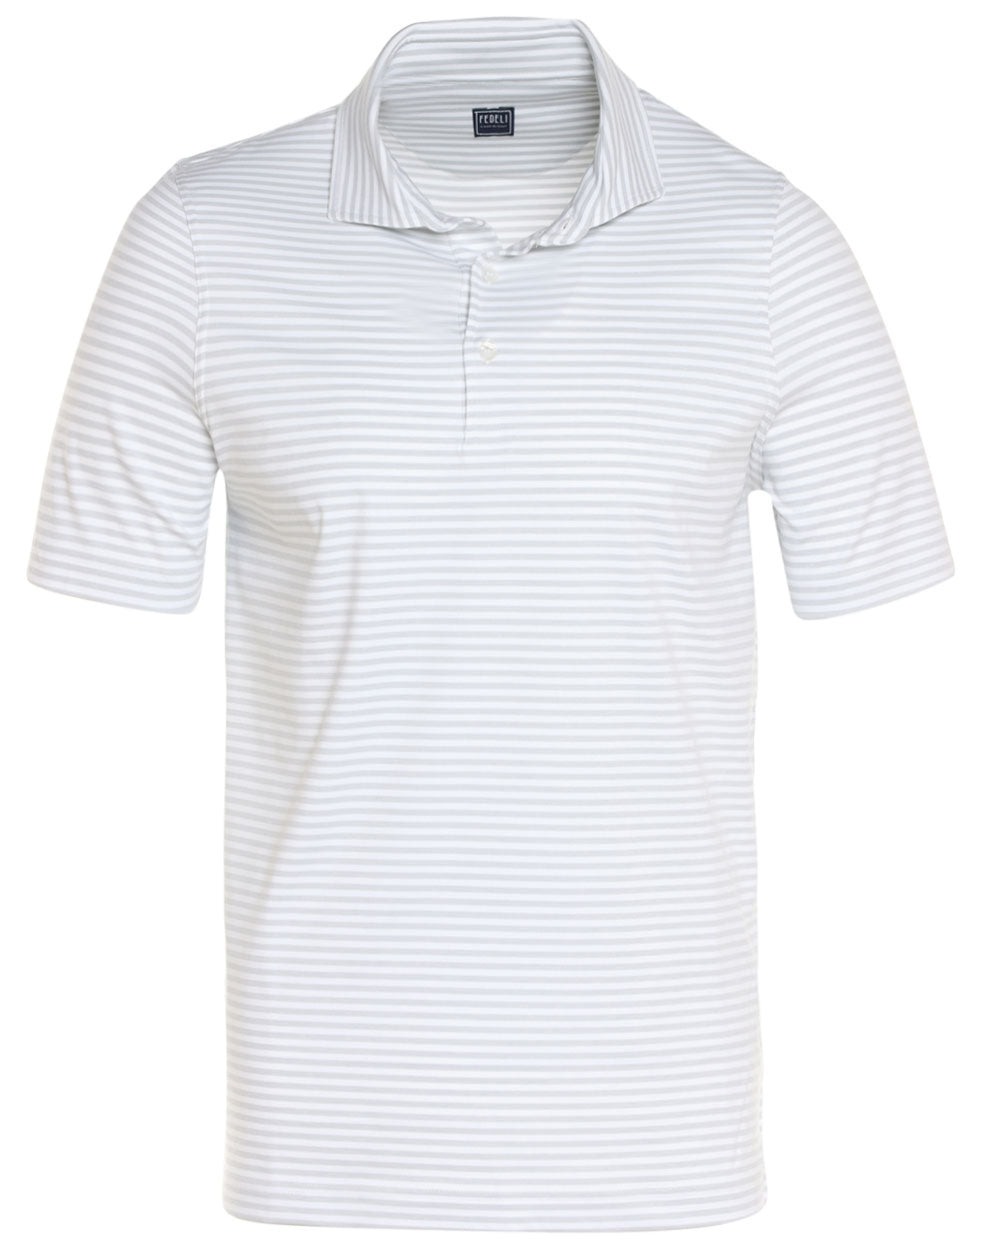 Grey and White Striped Jersey Short Sleeve Polo